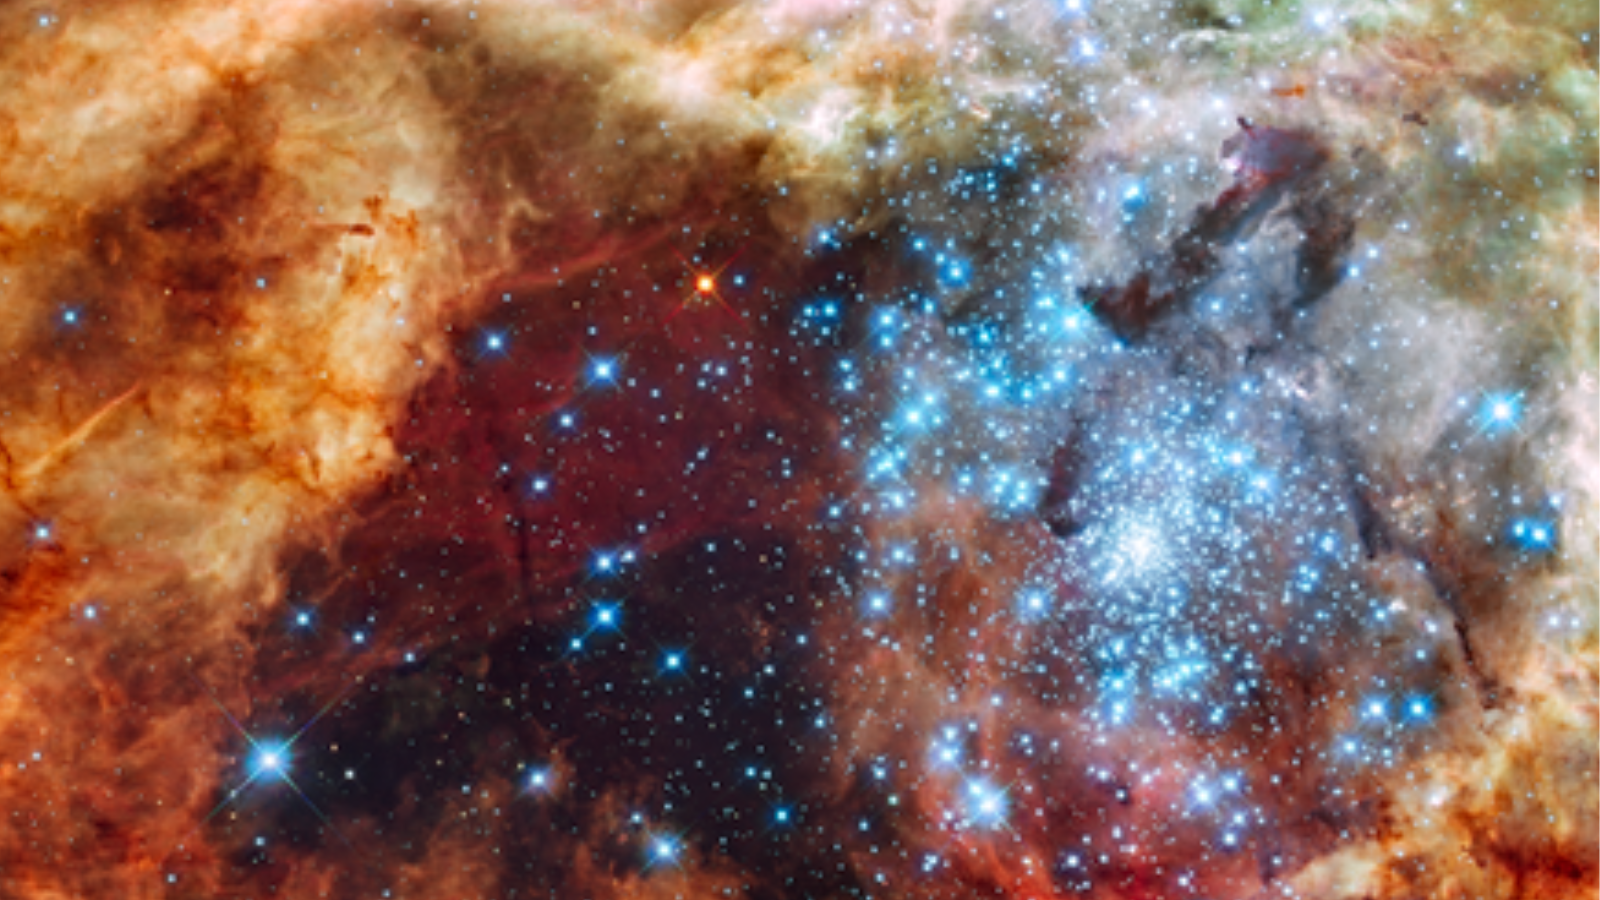 Hubble Space Telescope finds bucket of cosmic Easter eggs — 500 blue and red stars Space